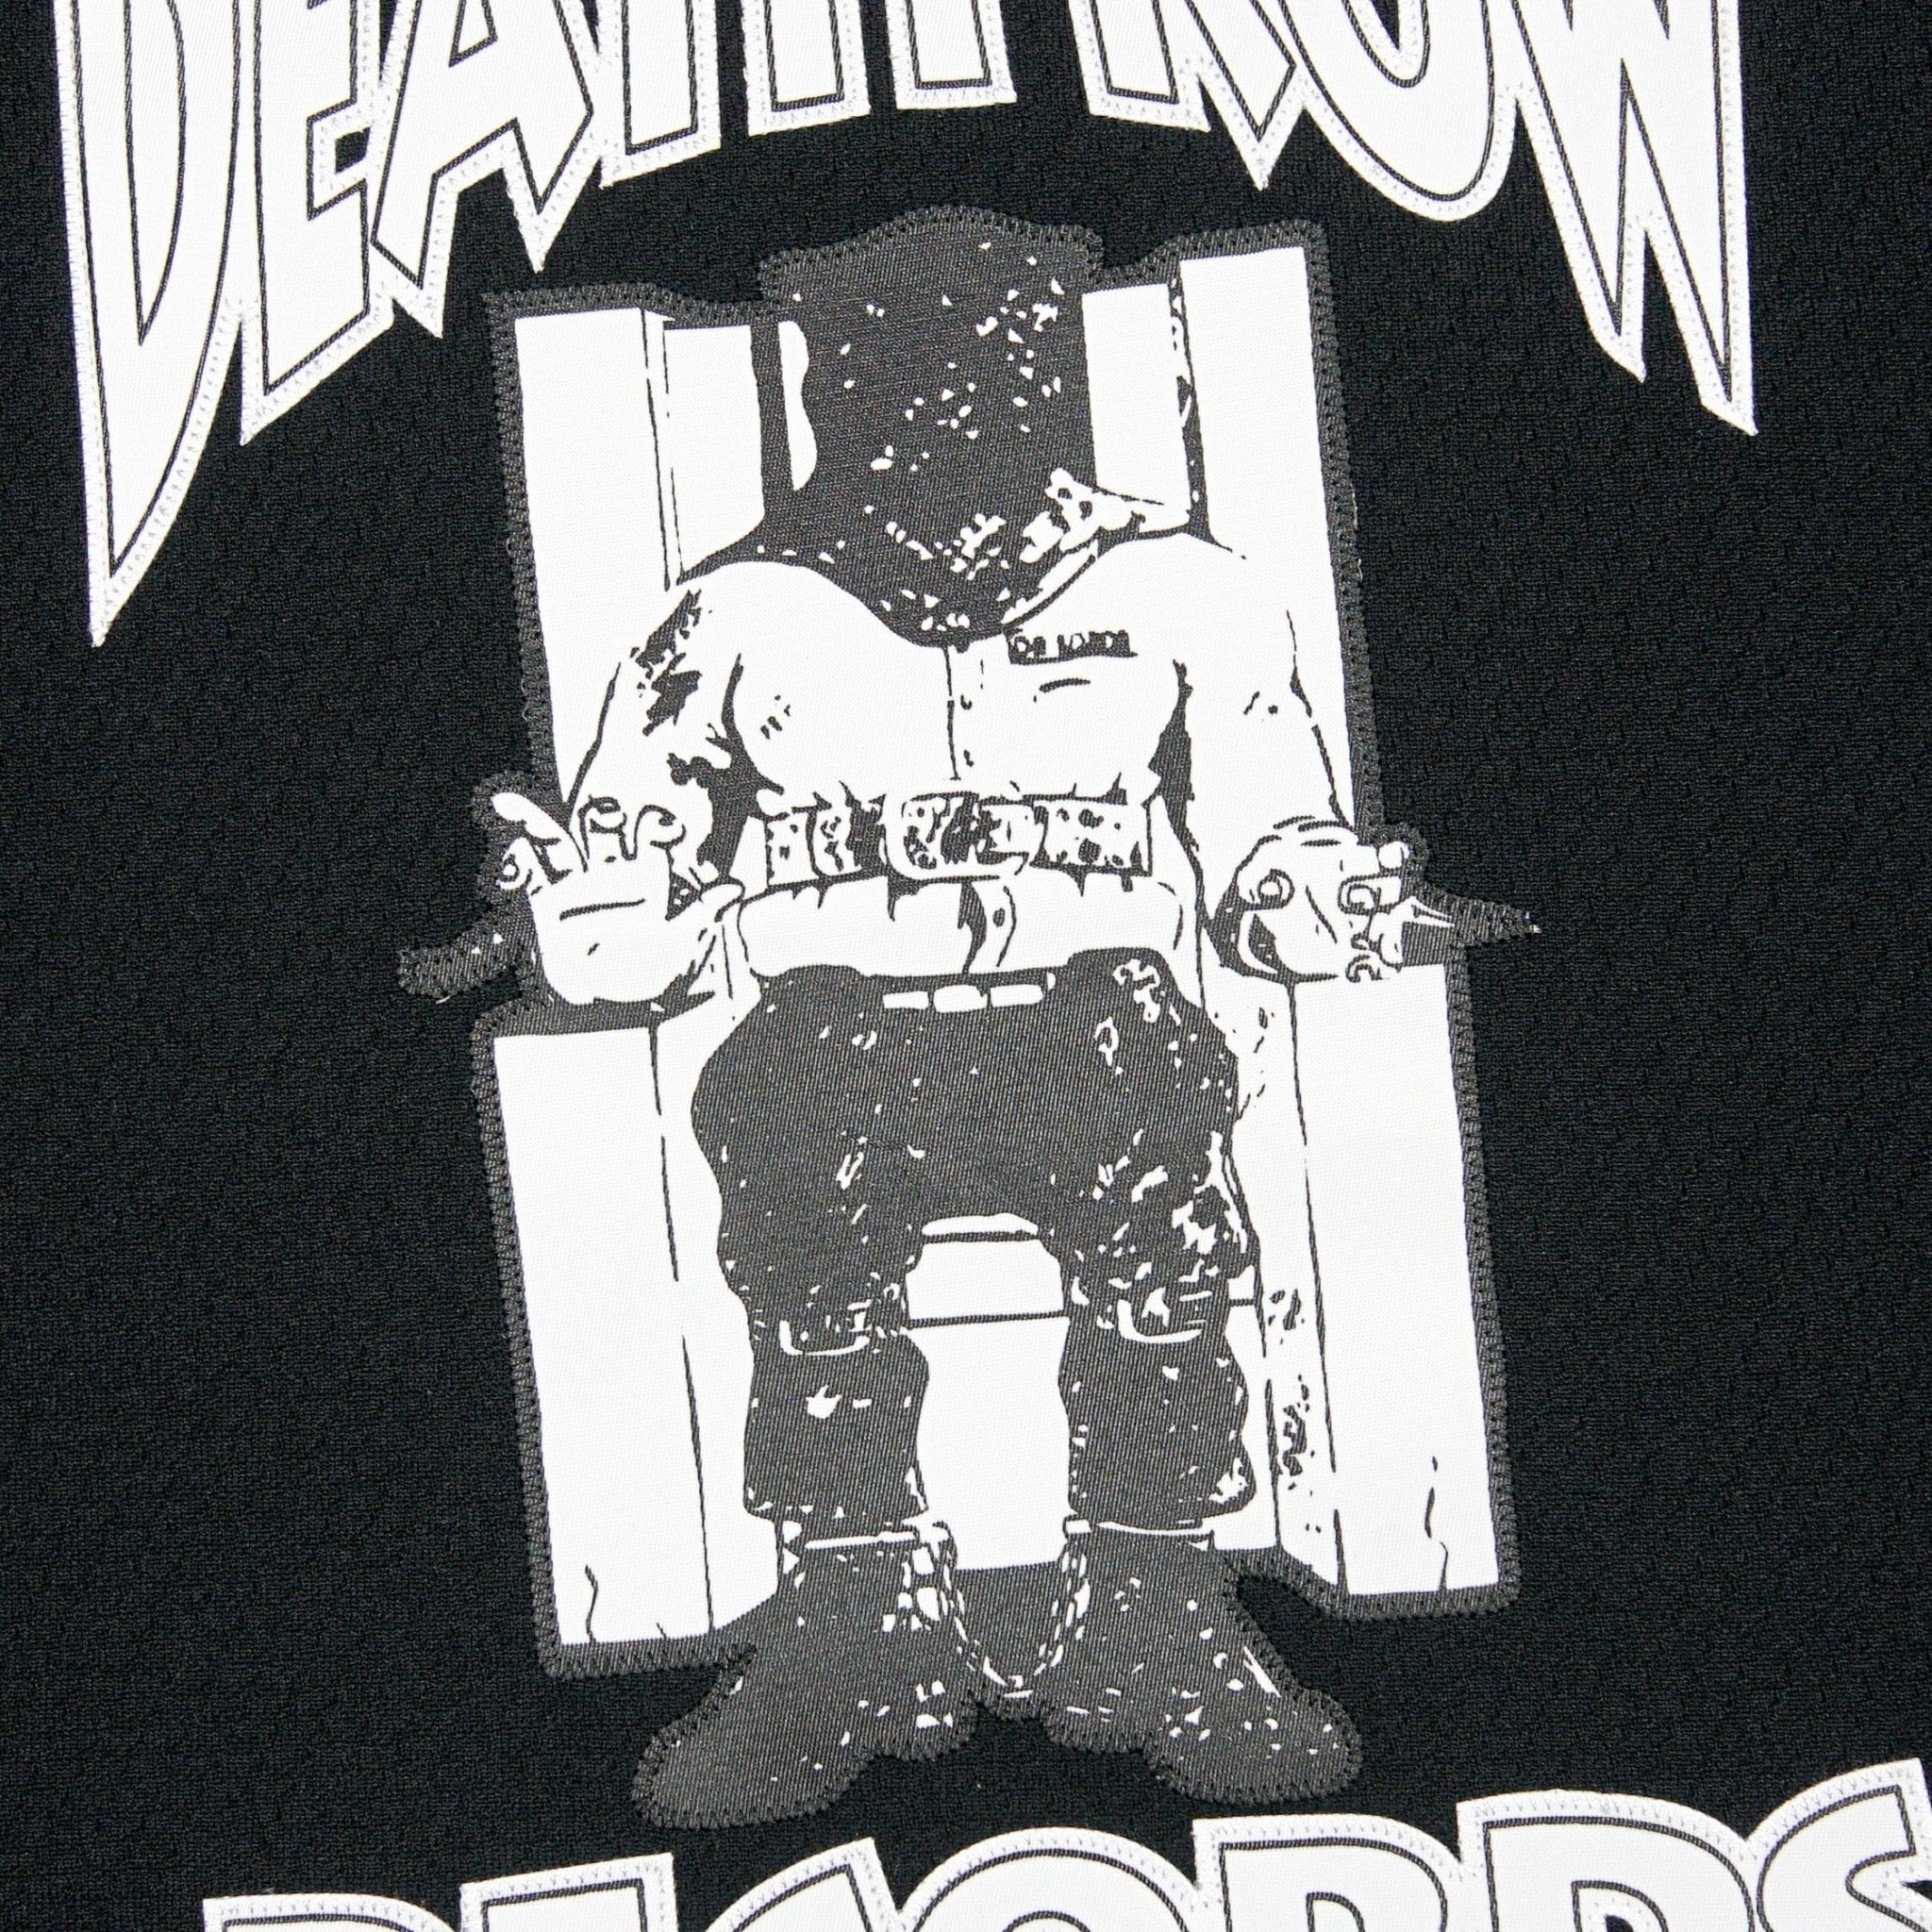 50th Anniversary of Hip Hop Death Row Hockey Jersey in black and white - Mitchell & Ness - State Of Flux